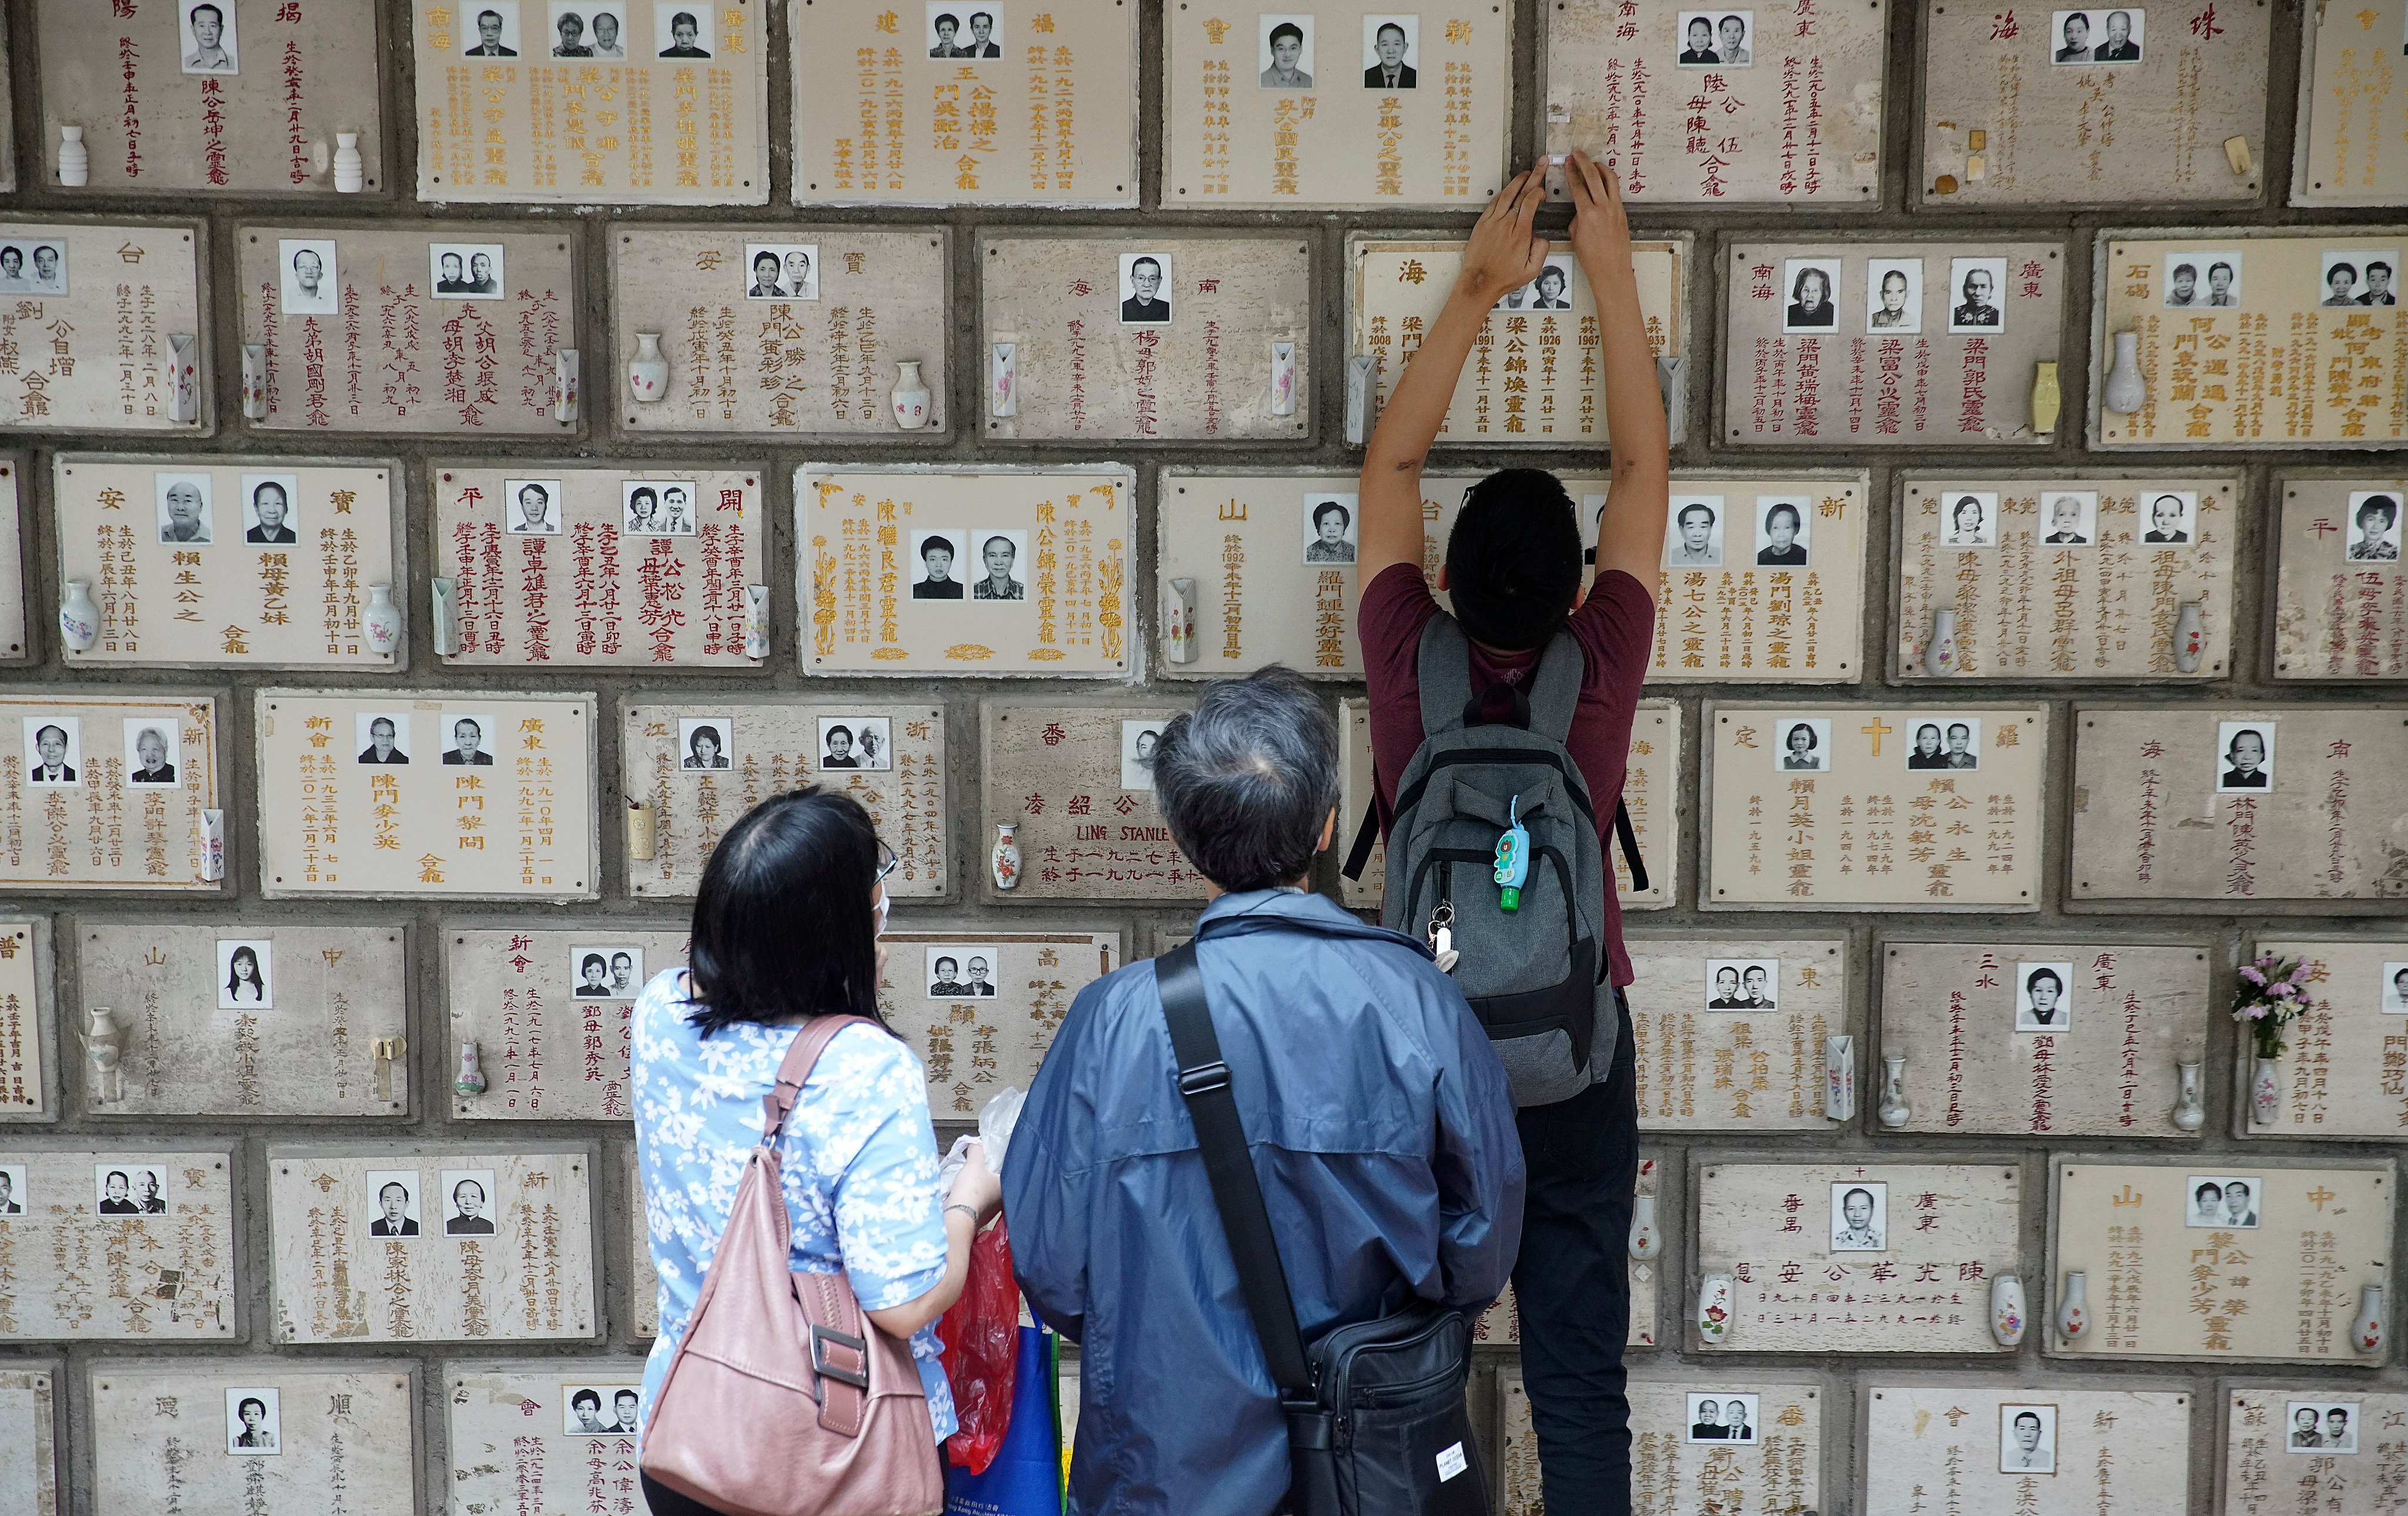 The conventional method in Hong Kong is place remains in columbariums. Photo: Winson Wong